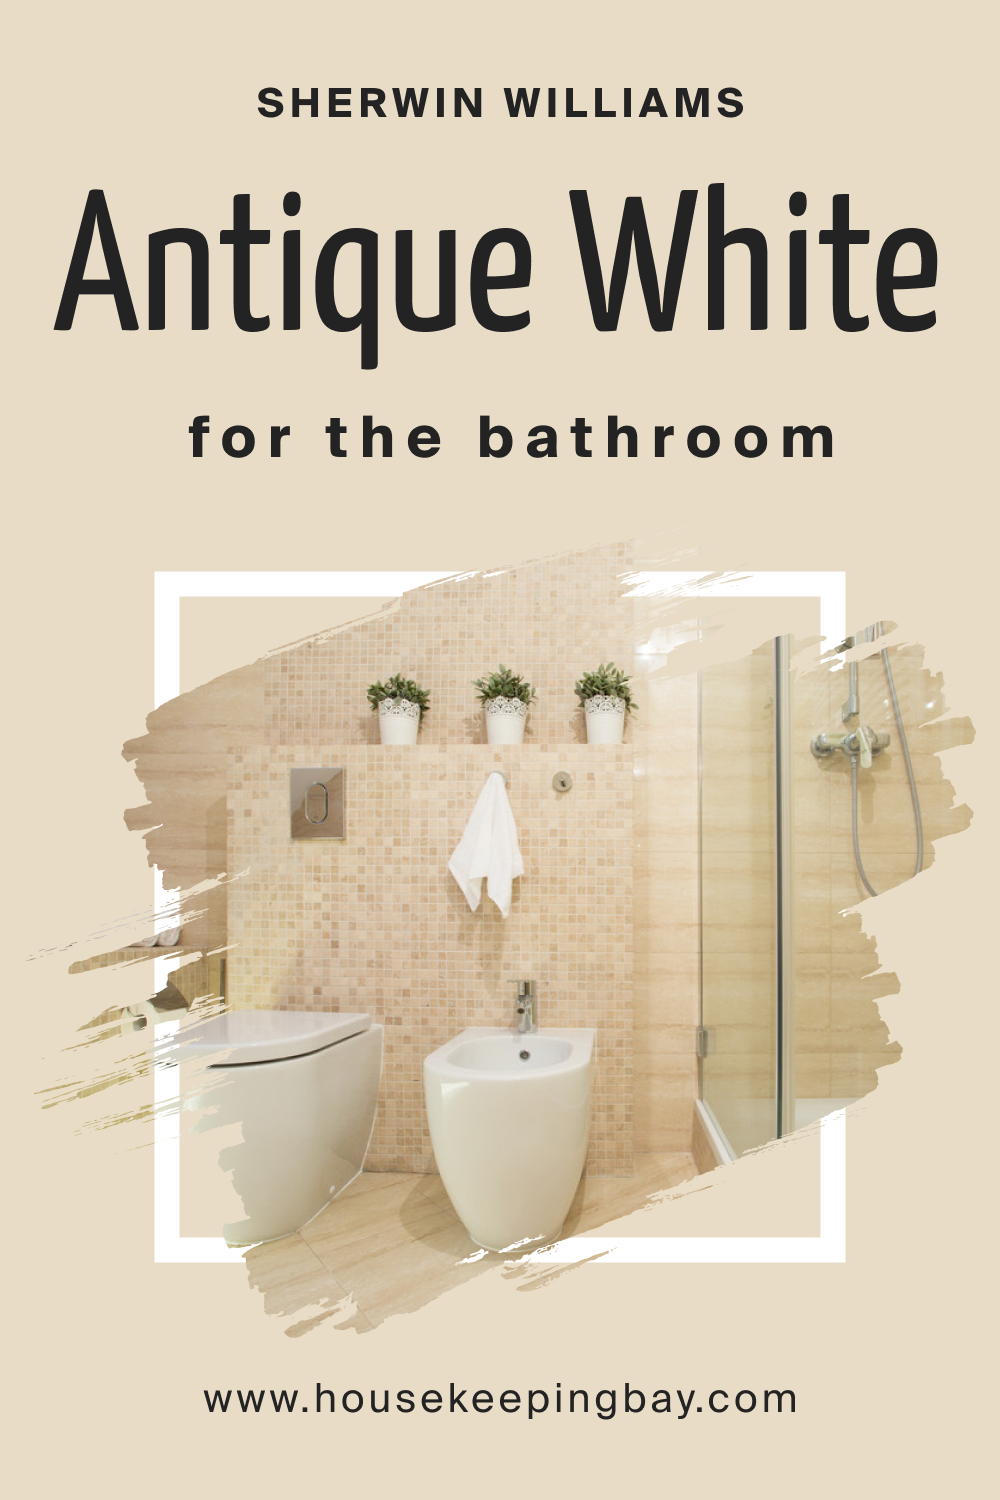 Sherwin Williams. SW Antique White in the Bathroom